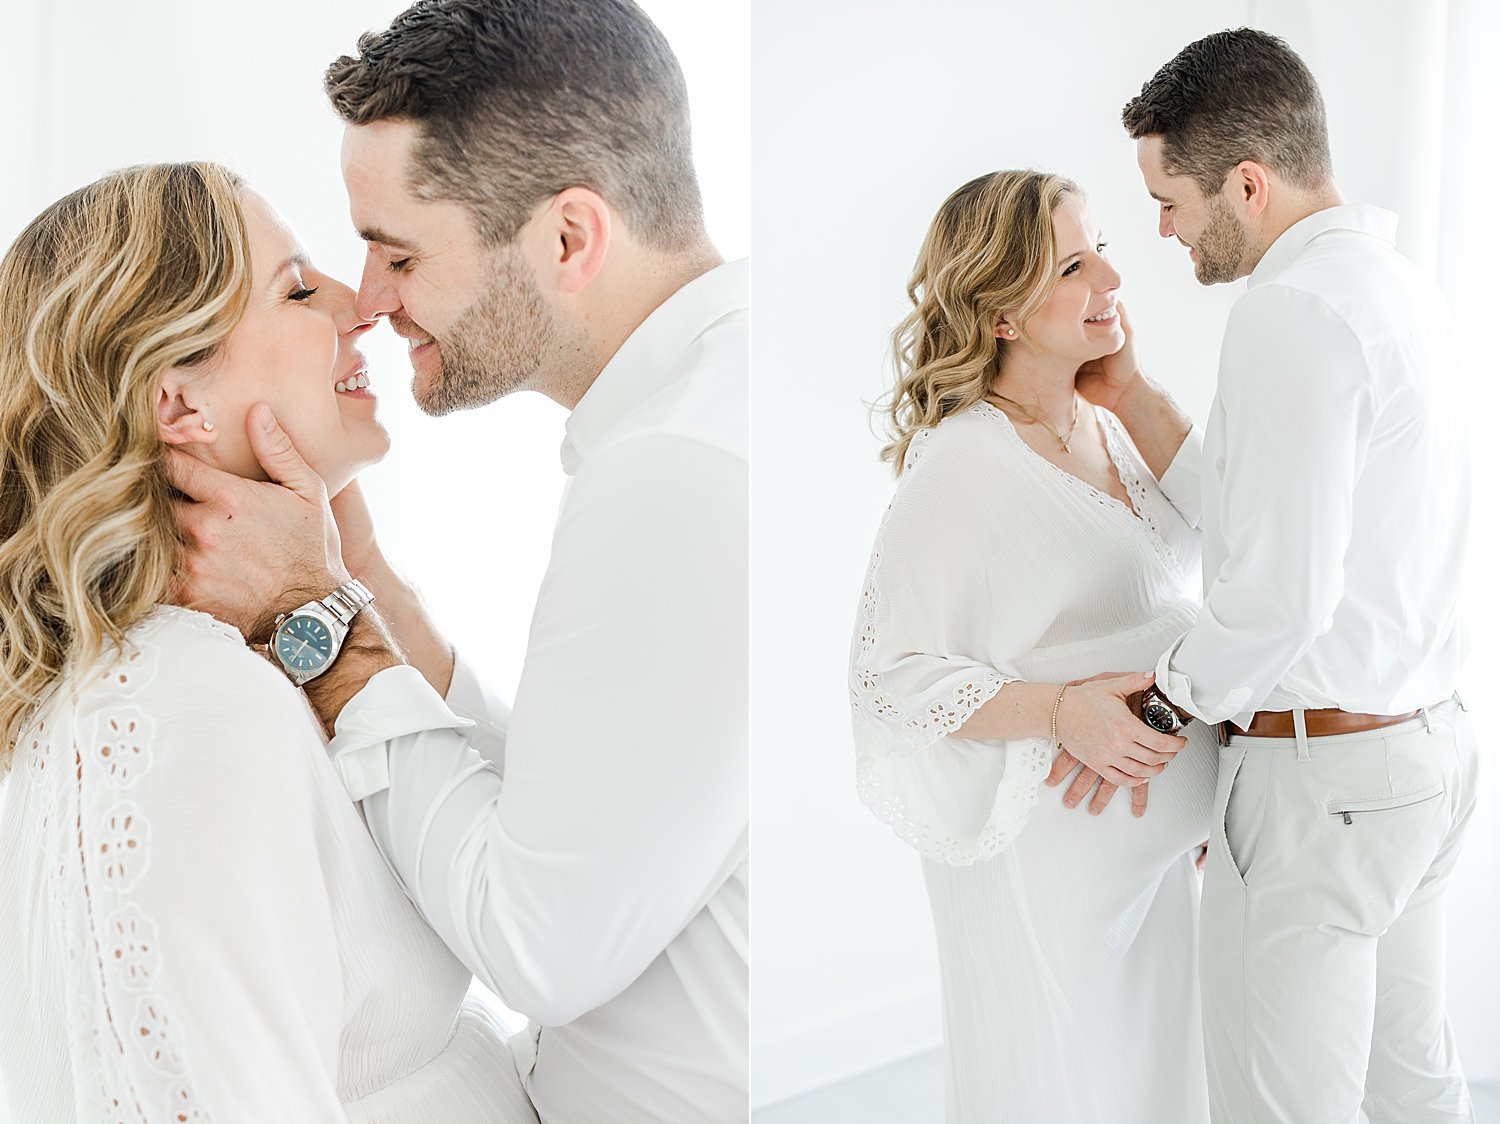 Expecting parents looking at each other | Kristin Wood Photography